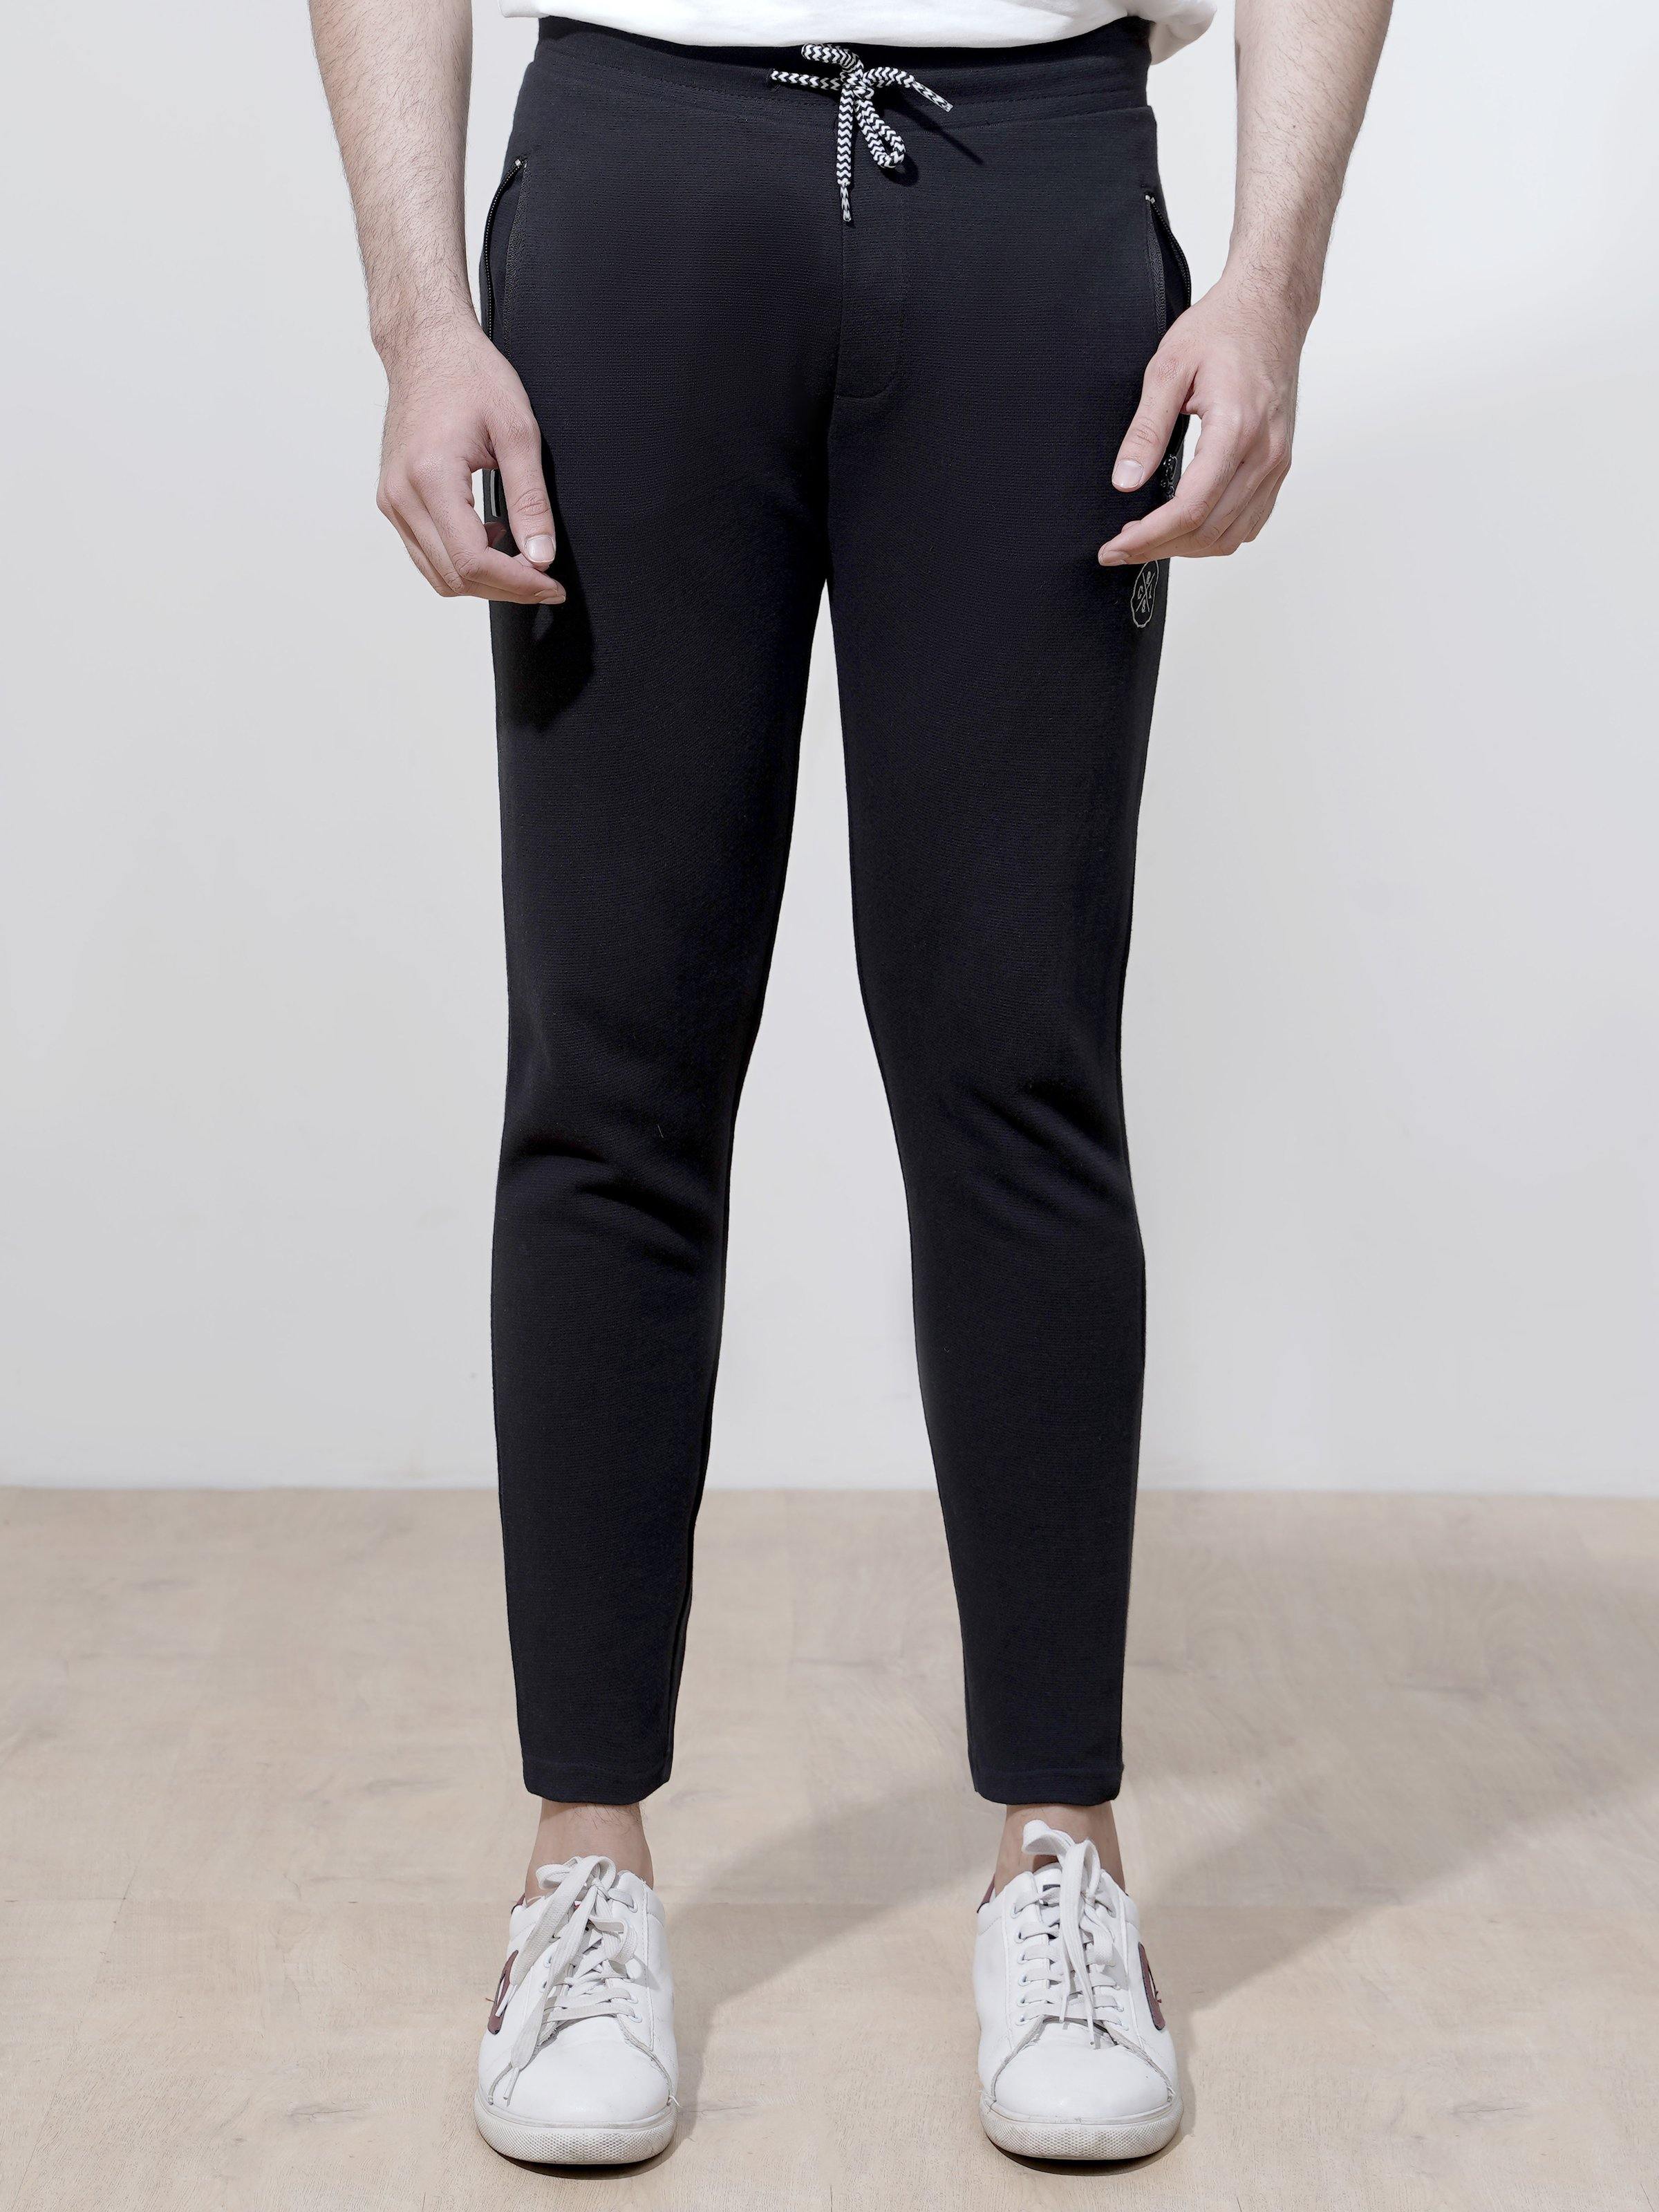 OTTOMAN JOGGER  TROUSER BLACK at Charcoal Clothing